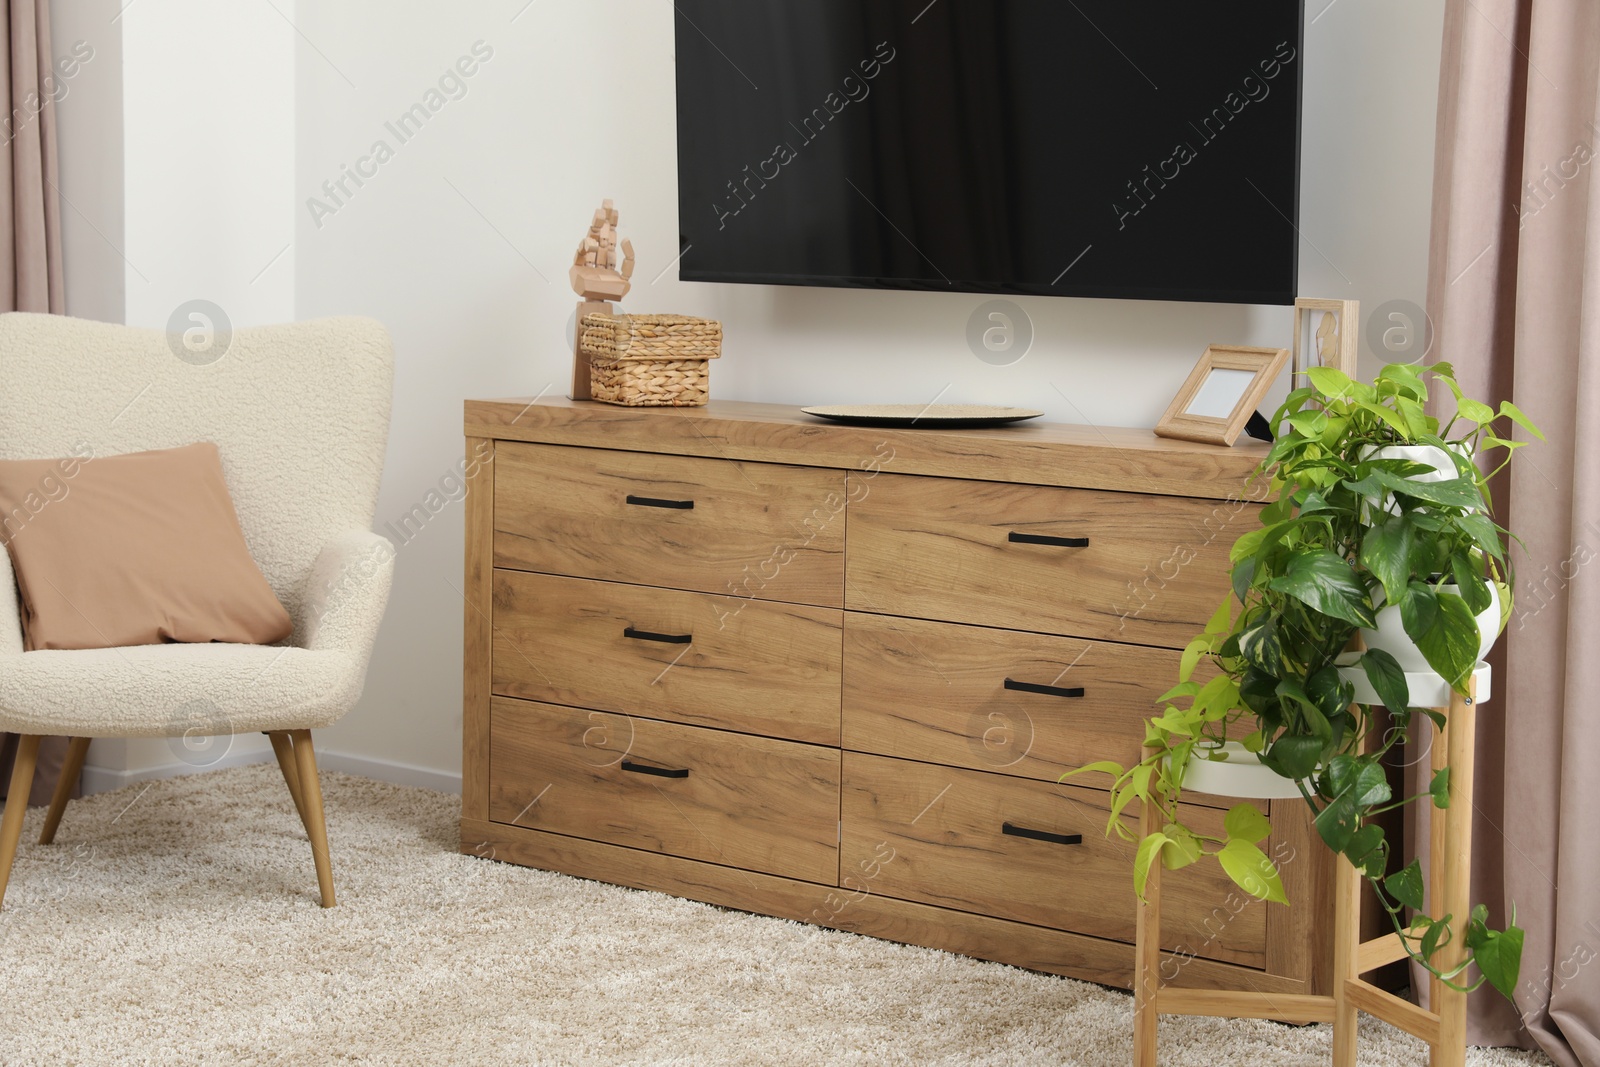 Photo of Cozy room interior with chest of drawers, TV set, armchair and decor elements